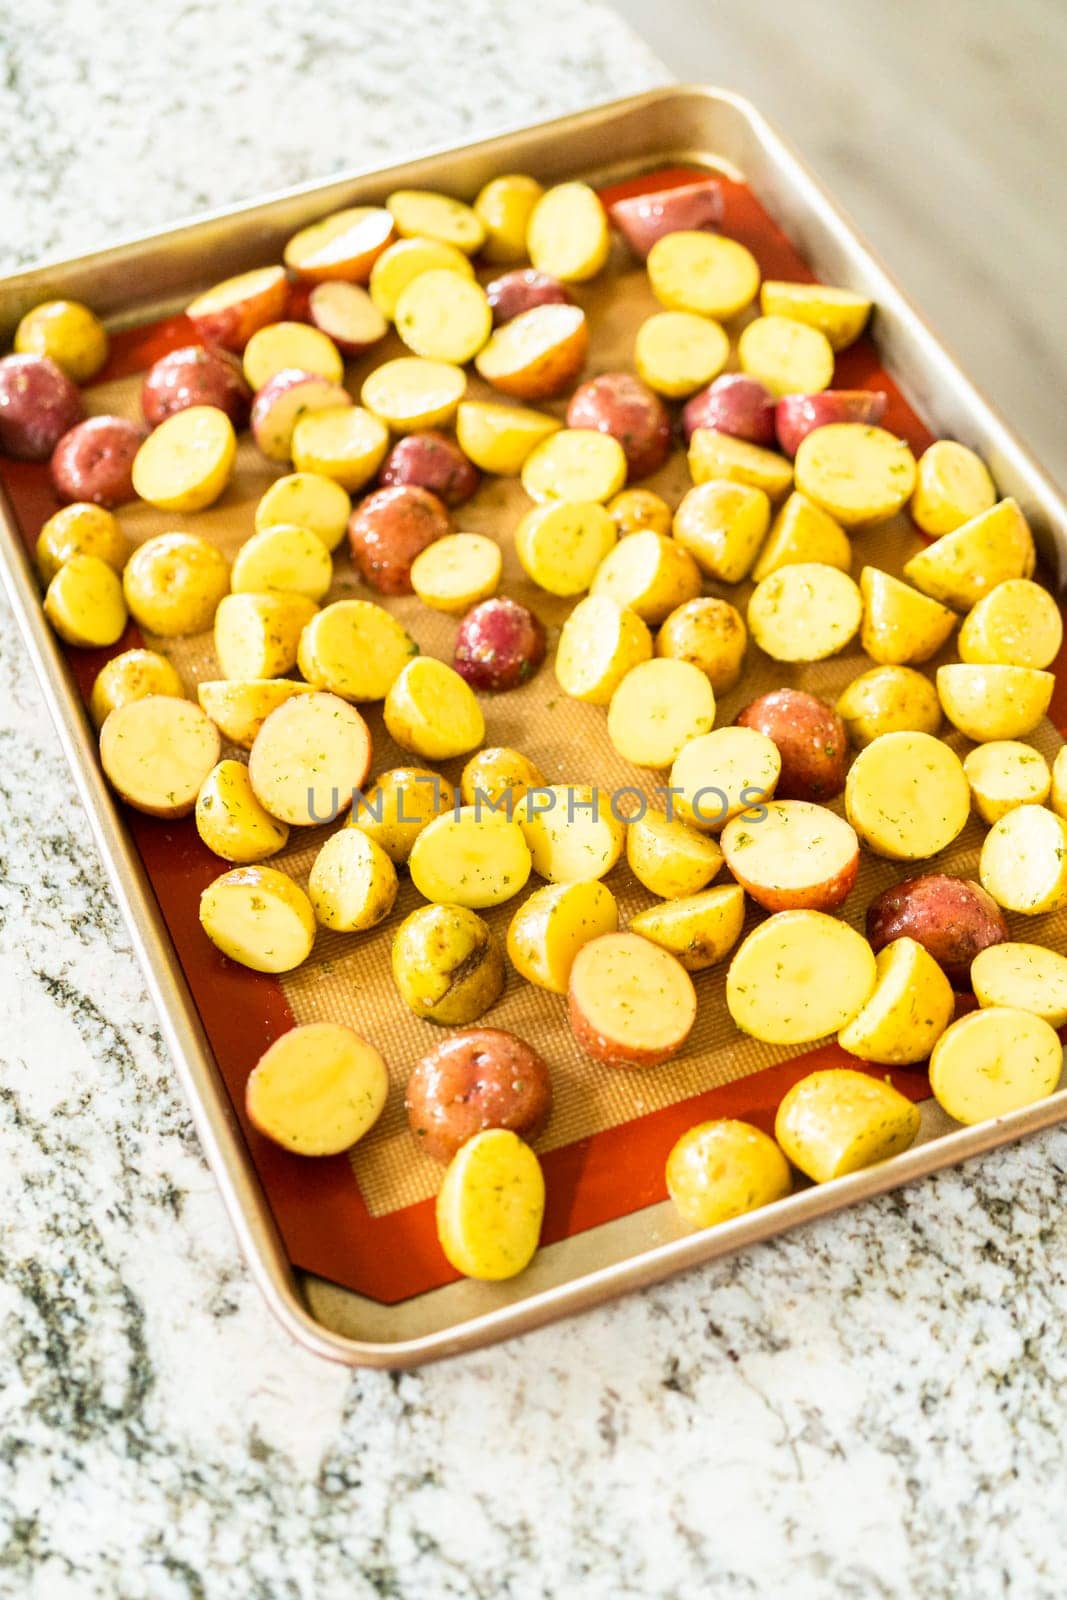 In a modern kitchen, an array of halved, multicolored marble potatoes are arranged on a baking pan lined with a silicone liner. The roasting process infuses the kitchen with a mouthwatering aroma, indicating a delicious side dish in the making.